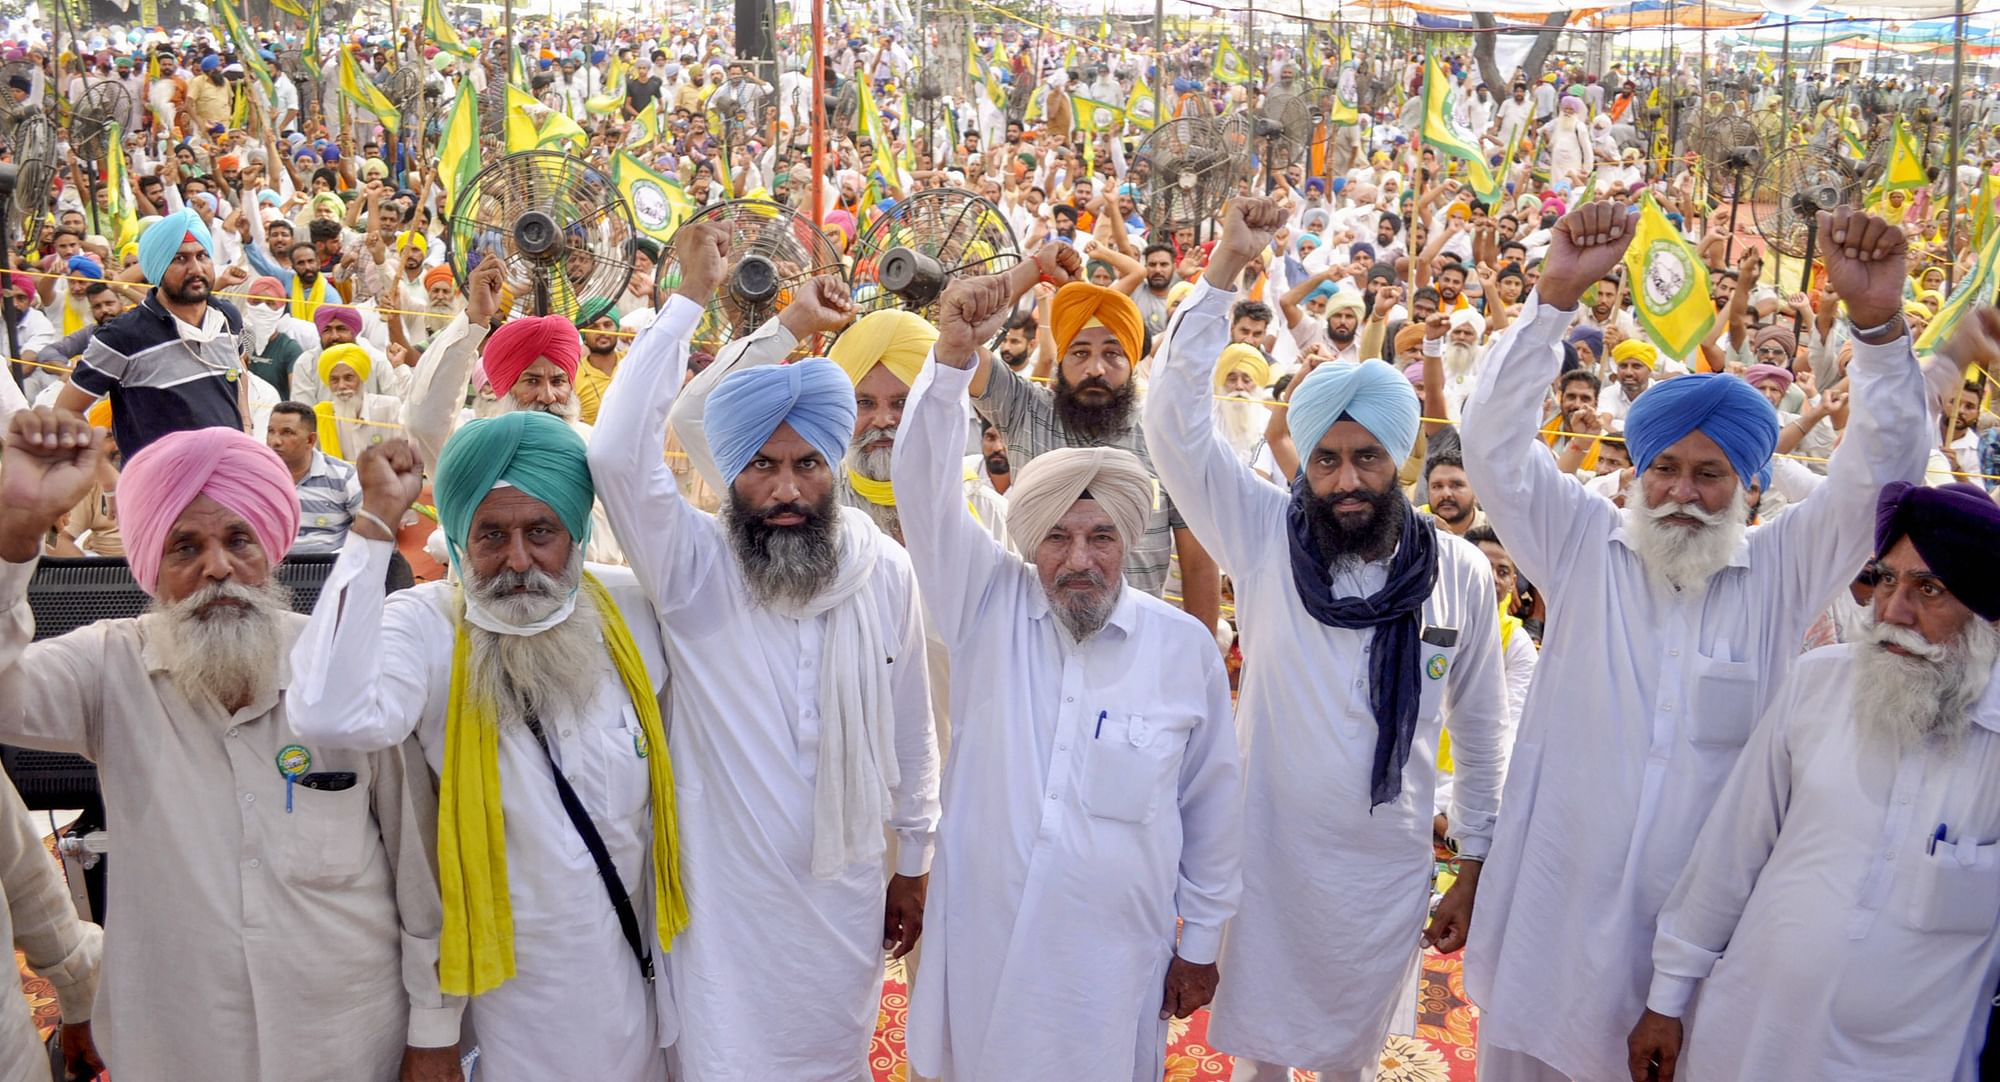 Representatives of various farmers organisations stage a protest against the Central Government over agriculture related issues, in Patiala.